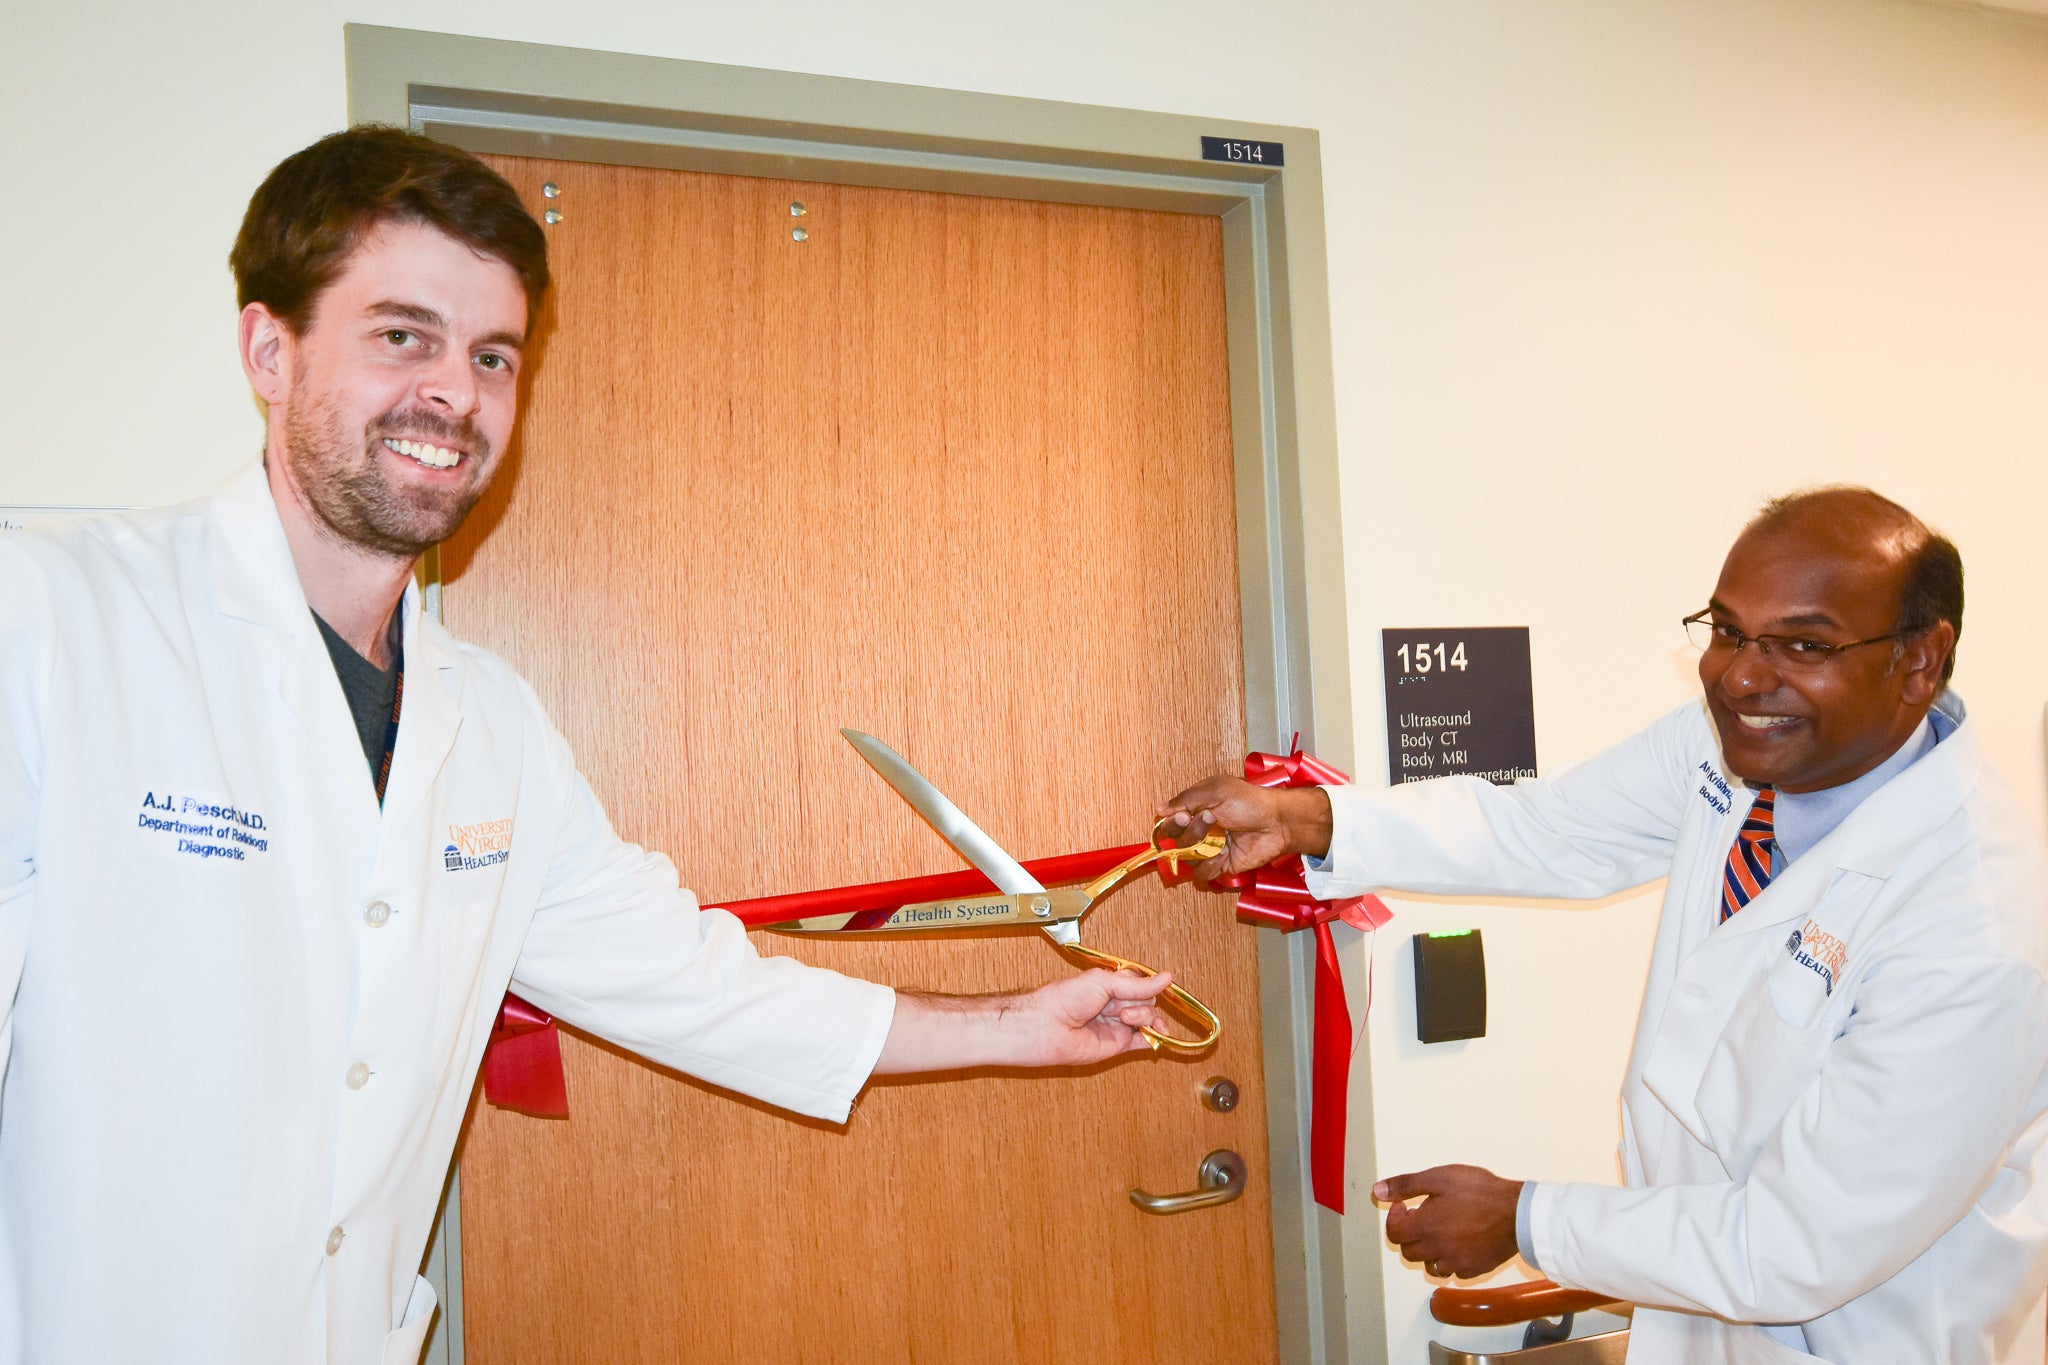 Dr. A.J. Pesch, left, and Dr. Arun Krishnaraj, right, cut the ribbon for the newly-renovated Body Reading Room